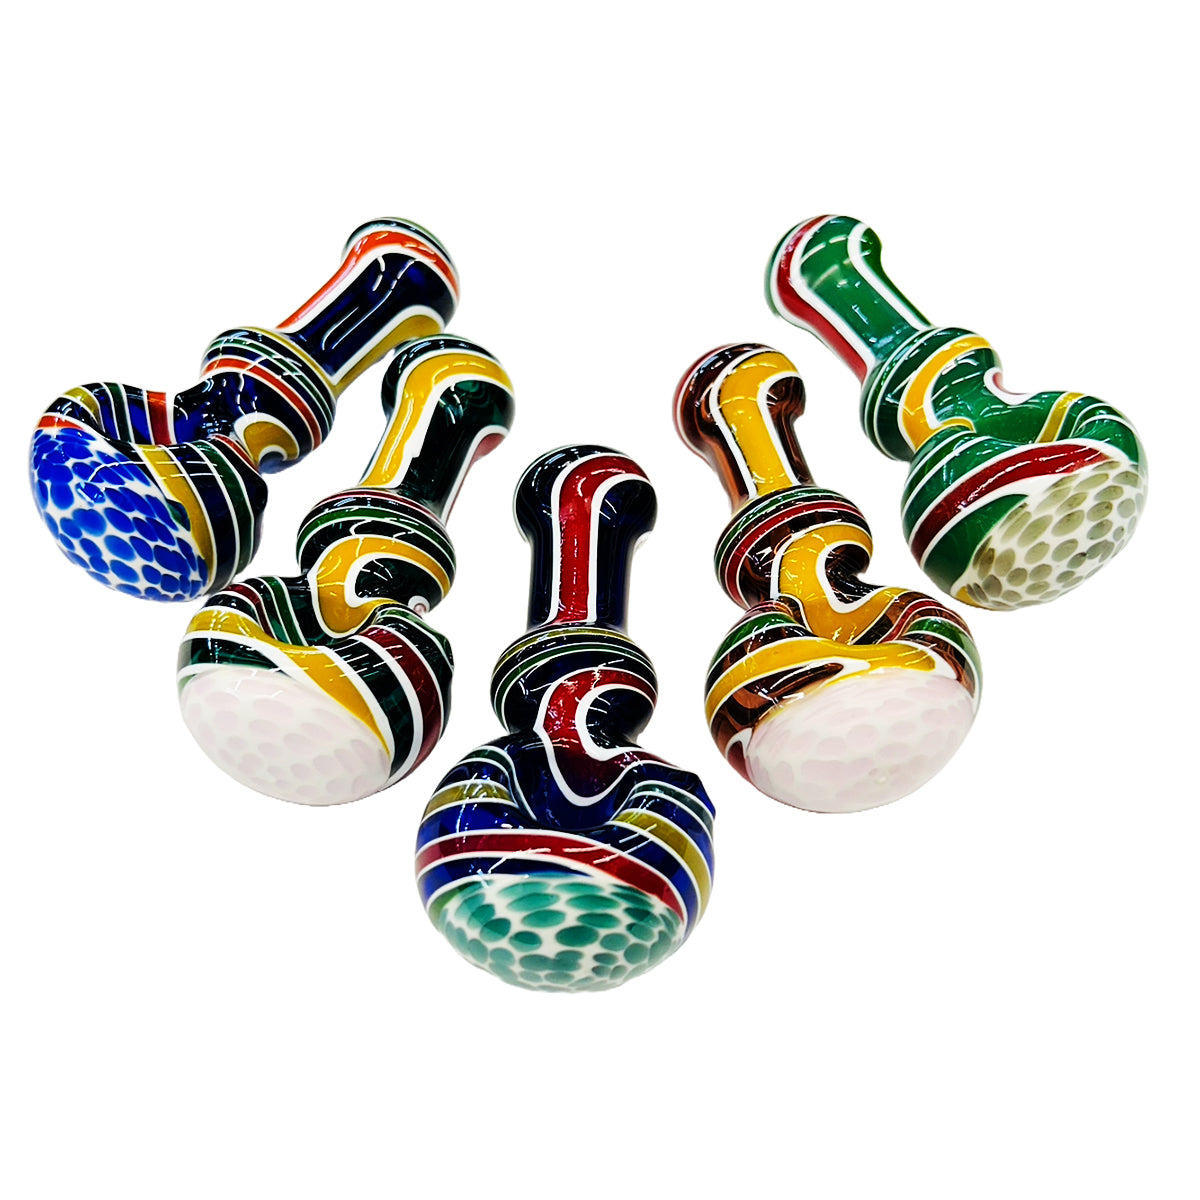 4.5" Hand Pipe Spoon Wig Wag Art with Honeycomb Art